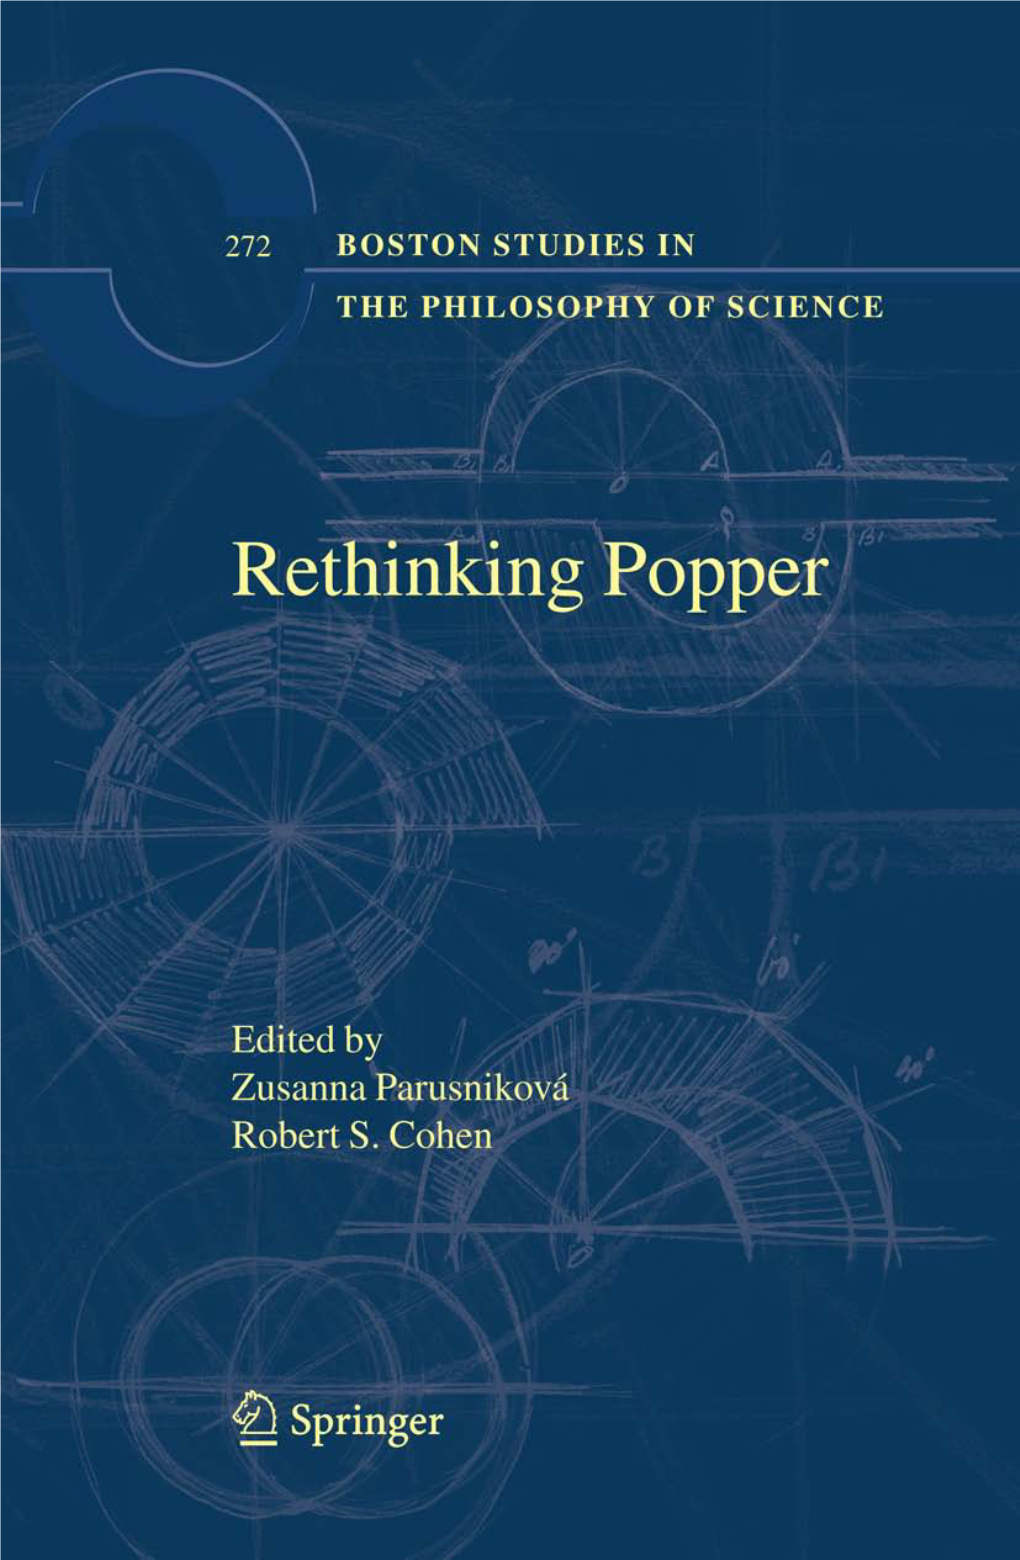 Karl Popper and Hans Albert Ð the Broad Scope of Critical Rationalism